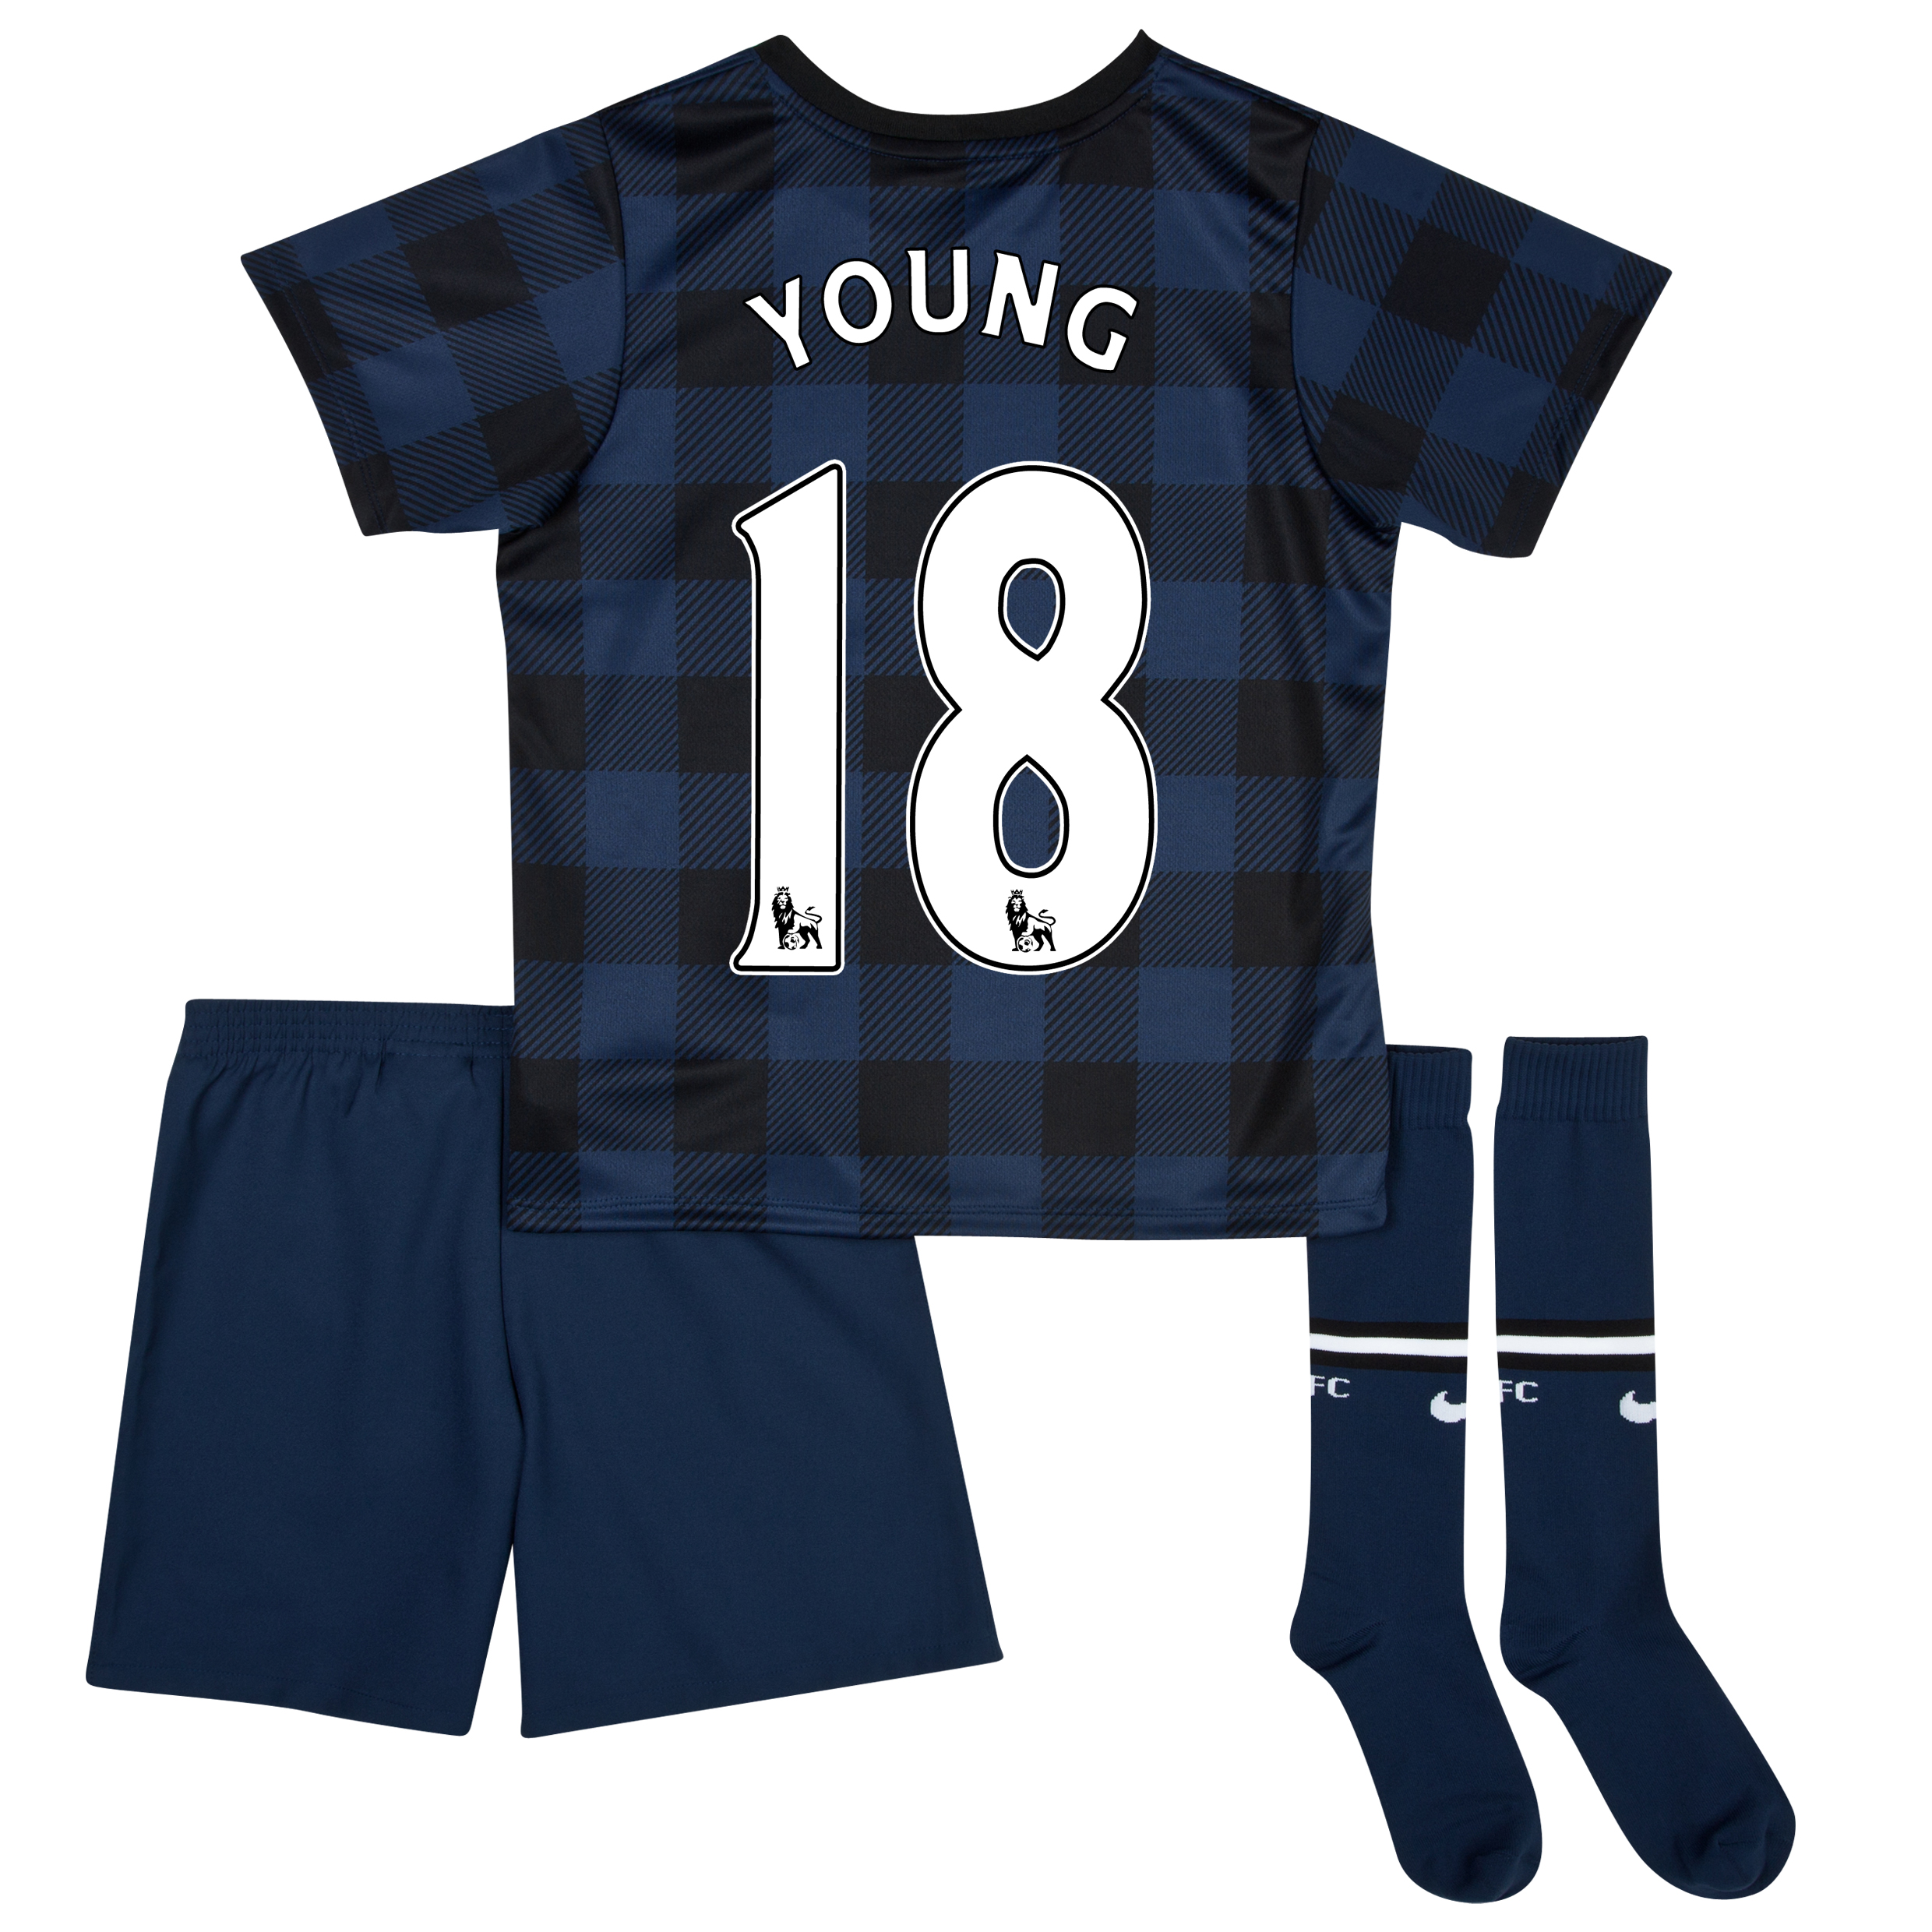 Manchester United Away Kit 2013/14 - Little Boys with Young 18 printing